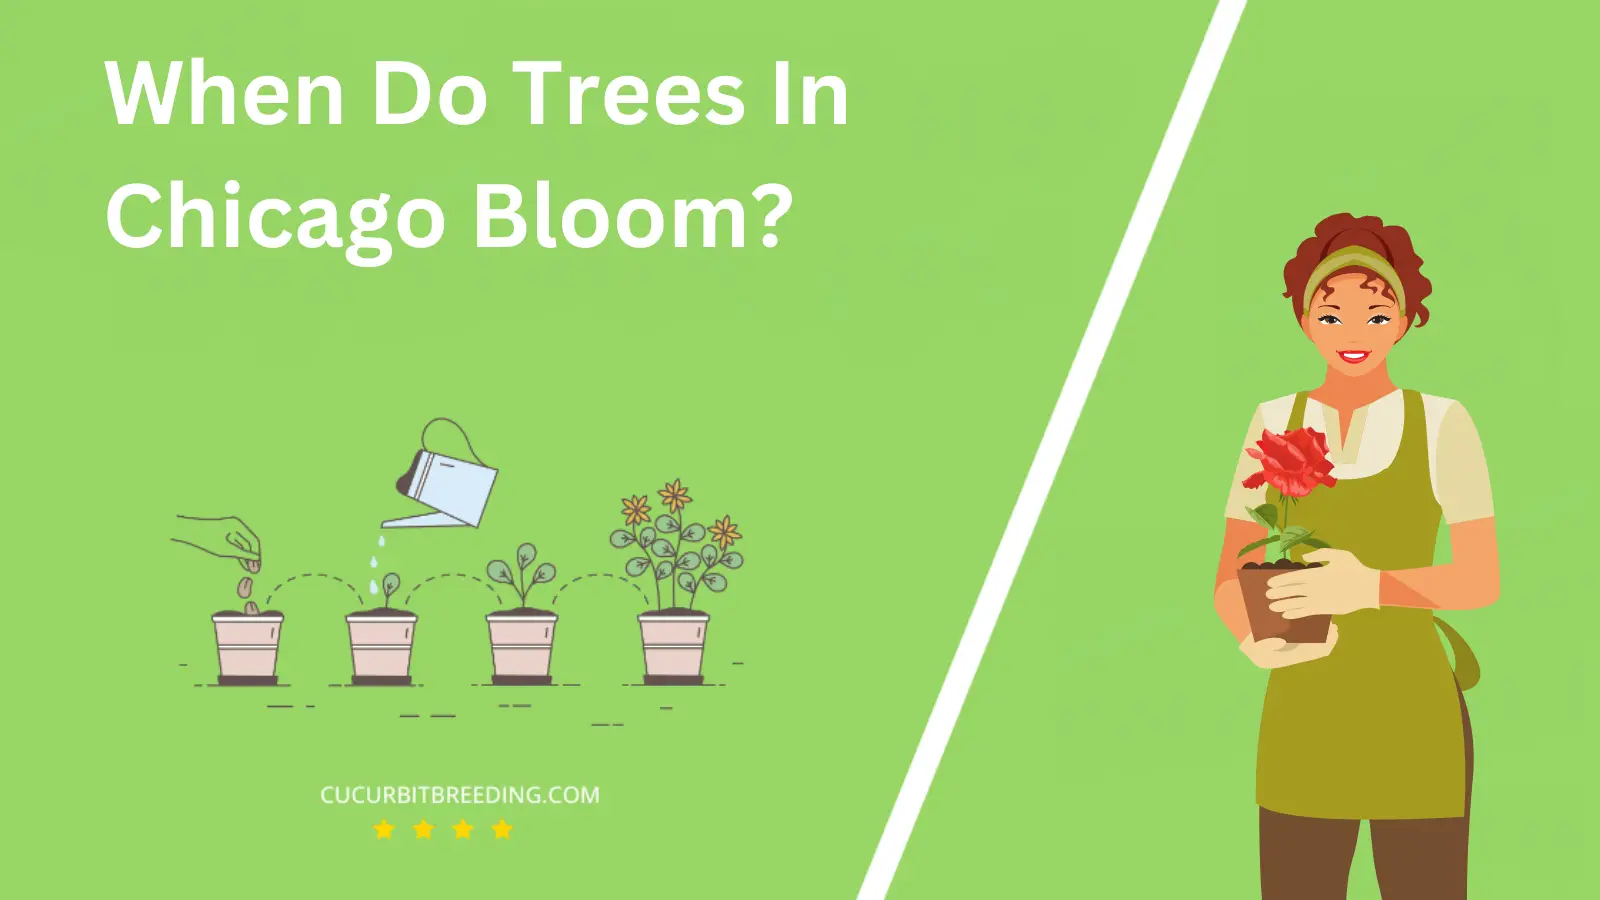 When Do Trees In Chicago Bloom?